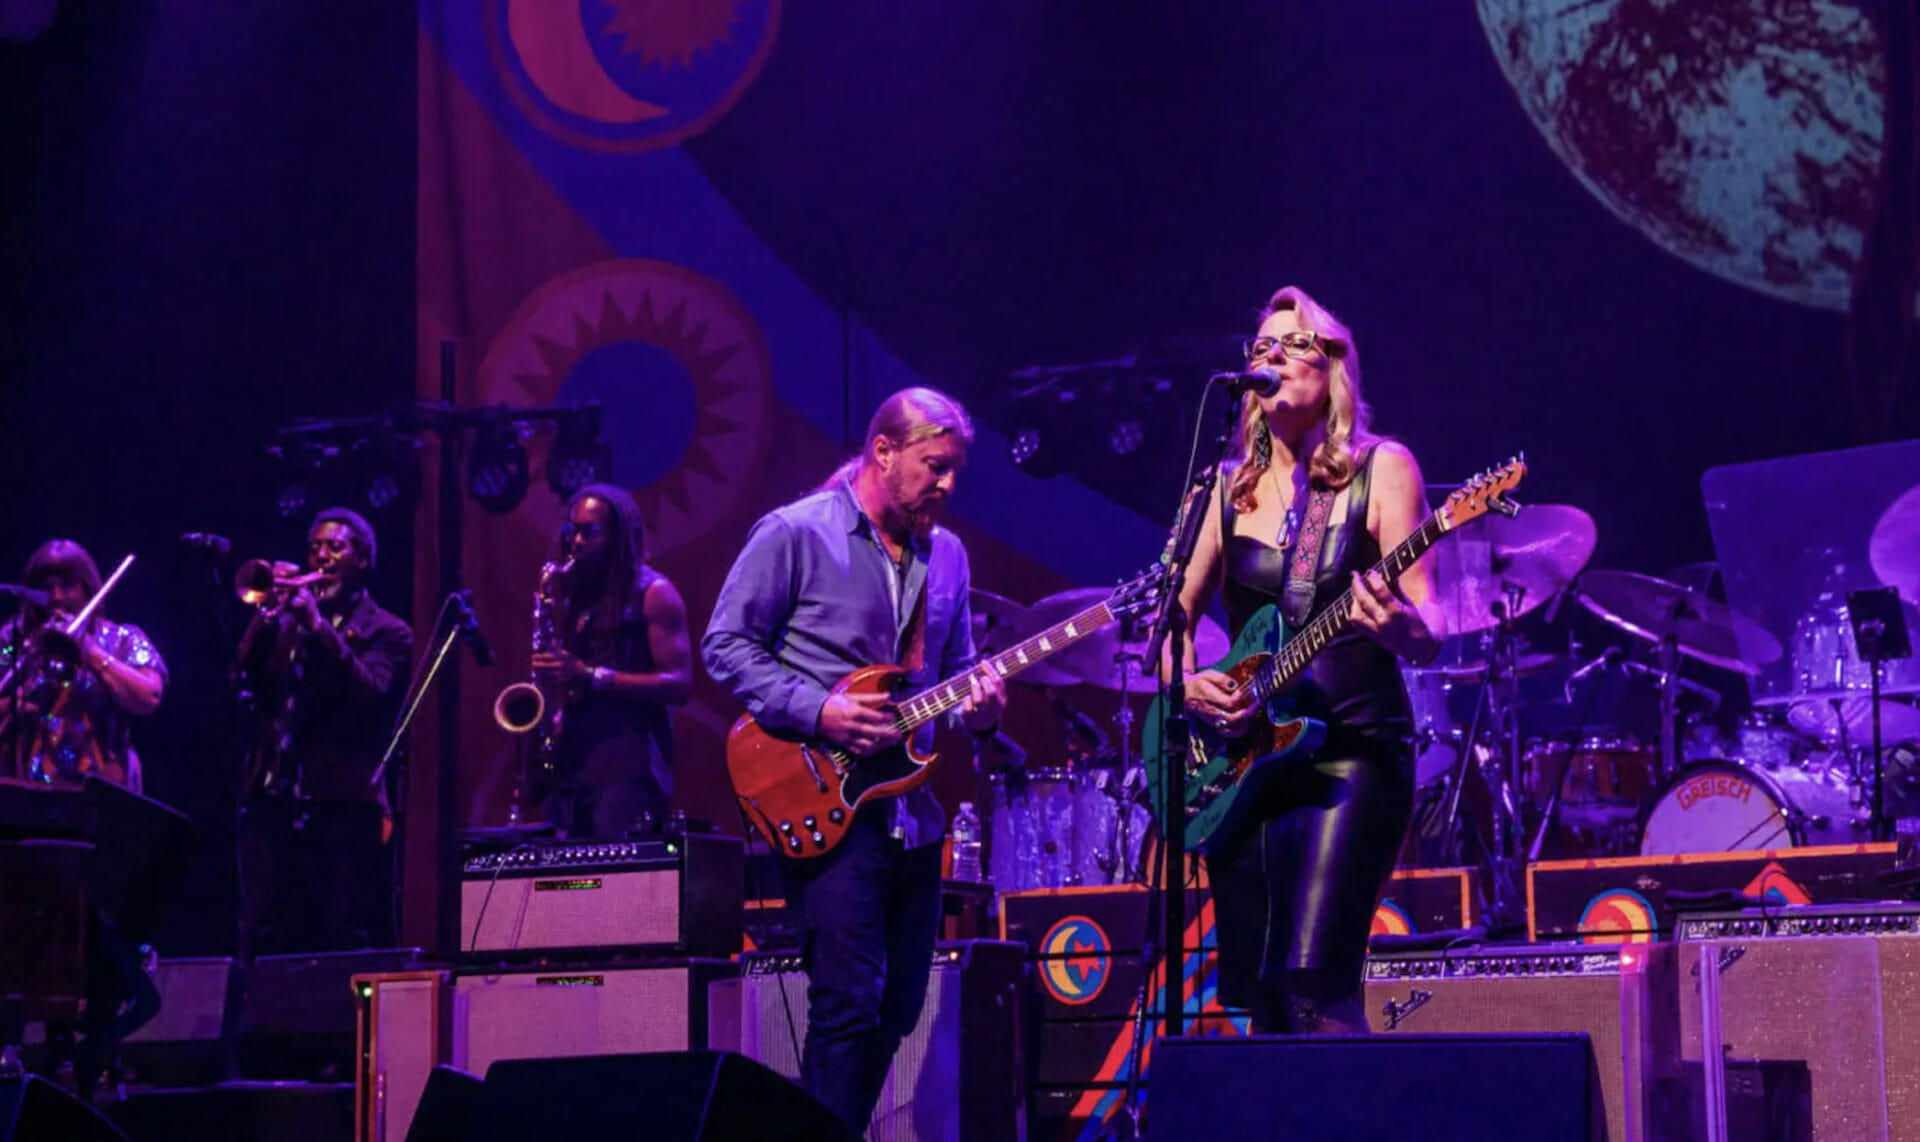 Tedeschi Trucks Band Debut Harry Styles’ “Sign of the Times” During Final Stand at Beacon Theatre